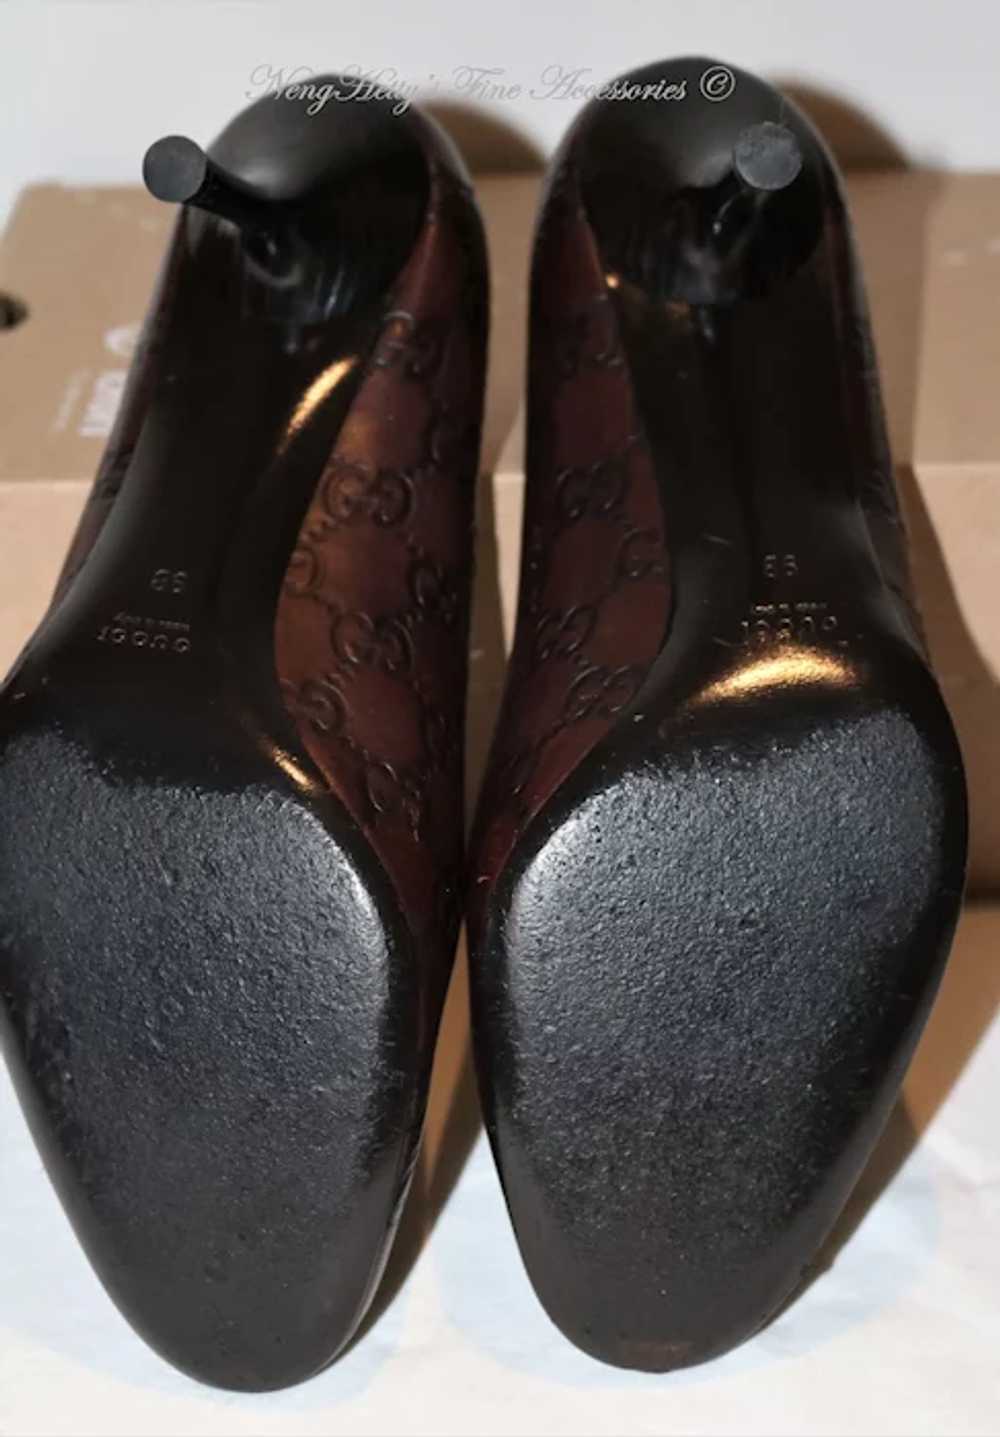 Vintage Gucci Guccissimo Pumps Sz 9B from Italy - image 4